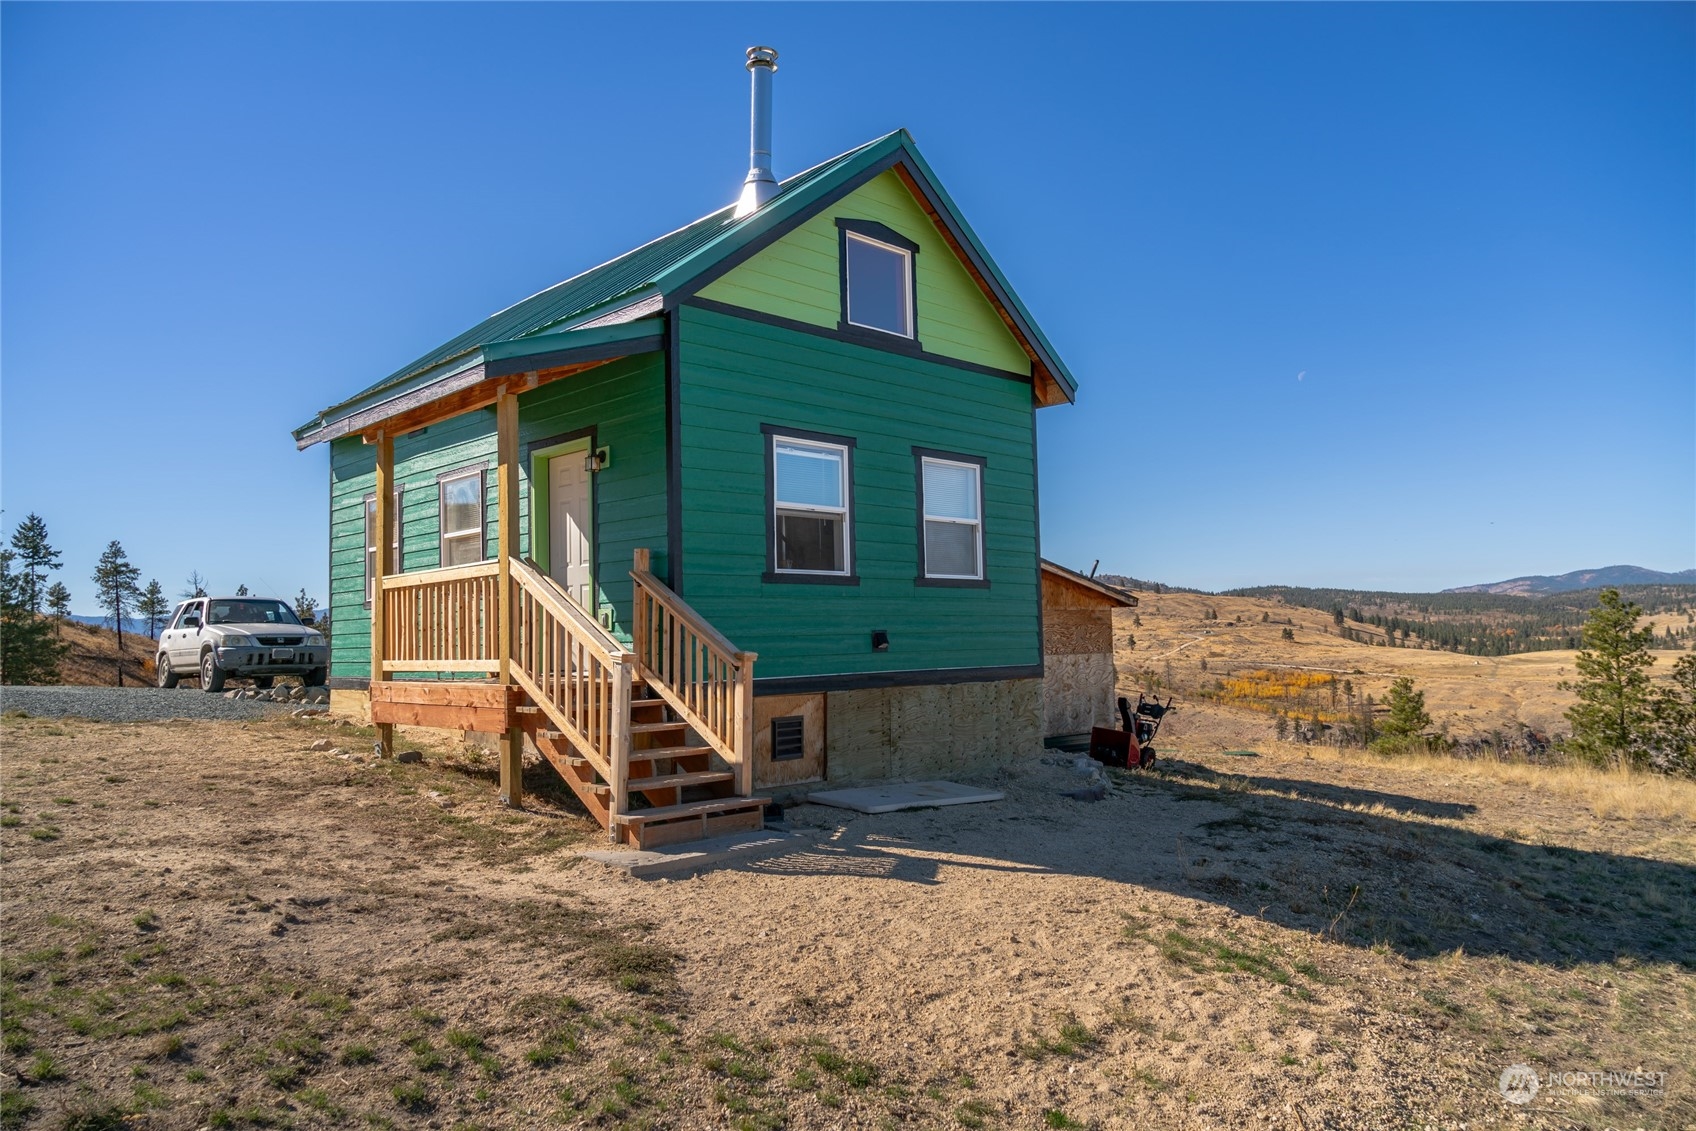 Colorado Mountains Tiny Homes With Land for Sale - 36 Properties